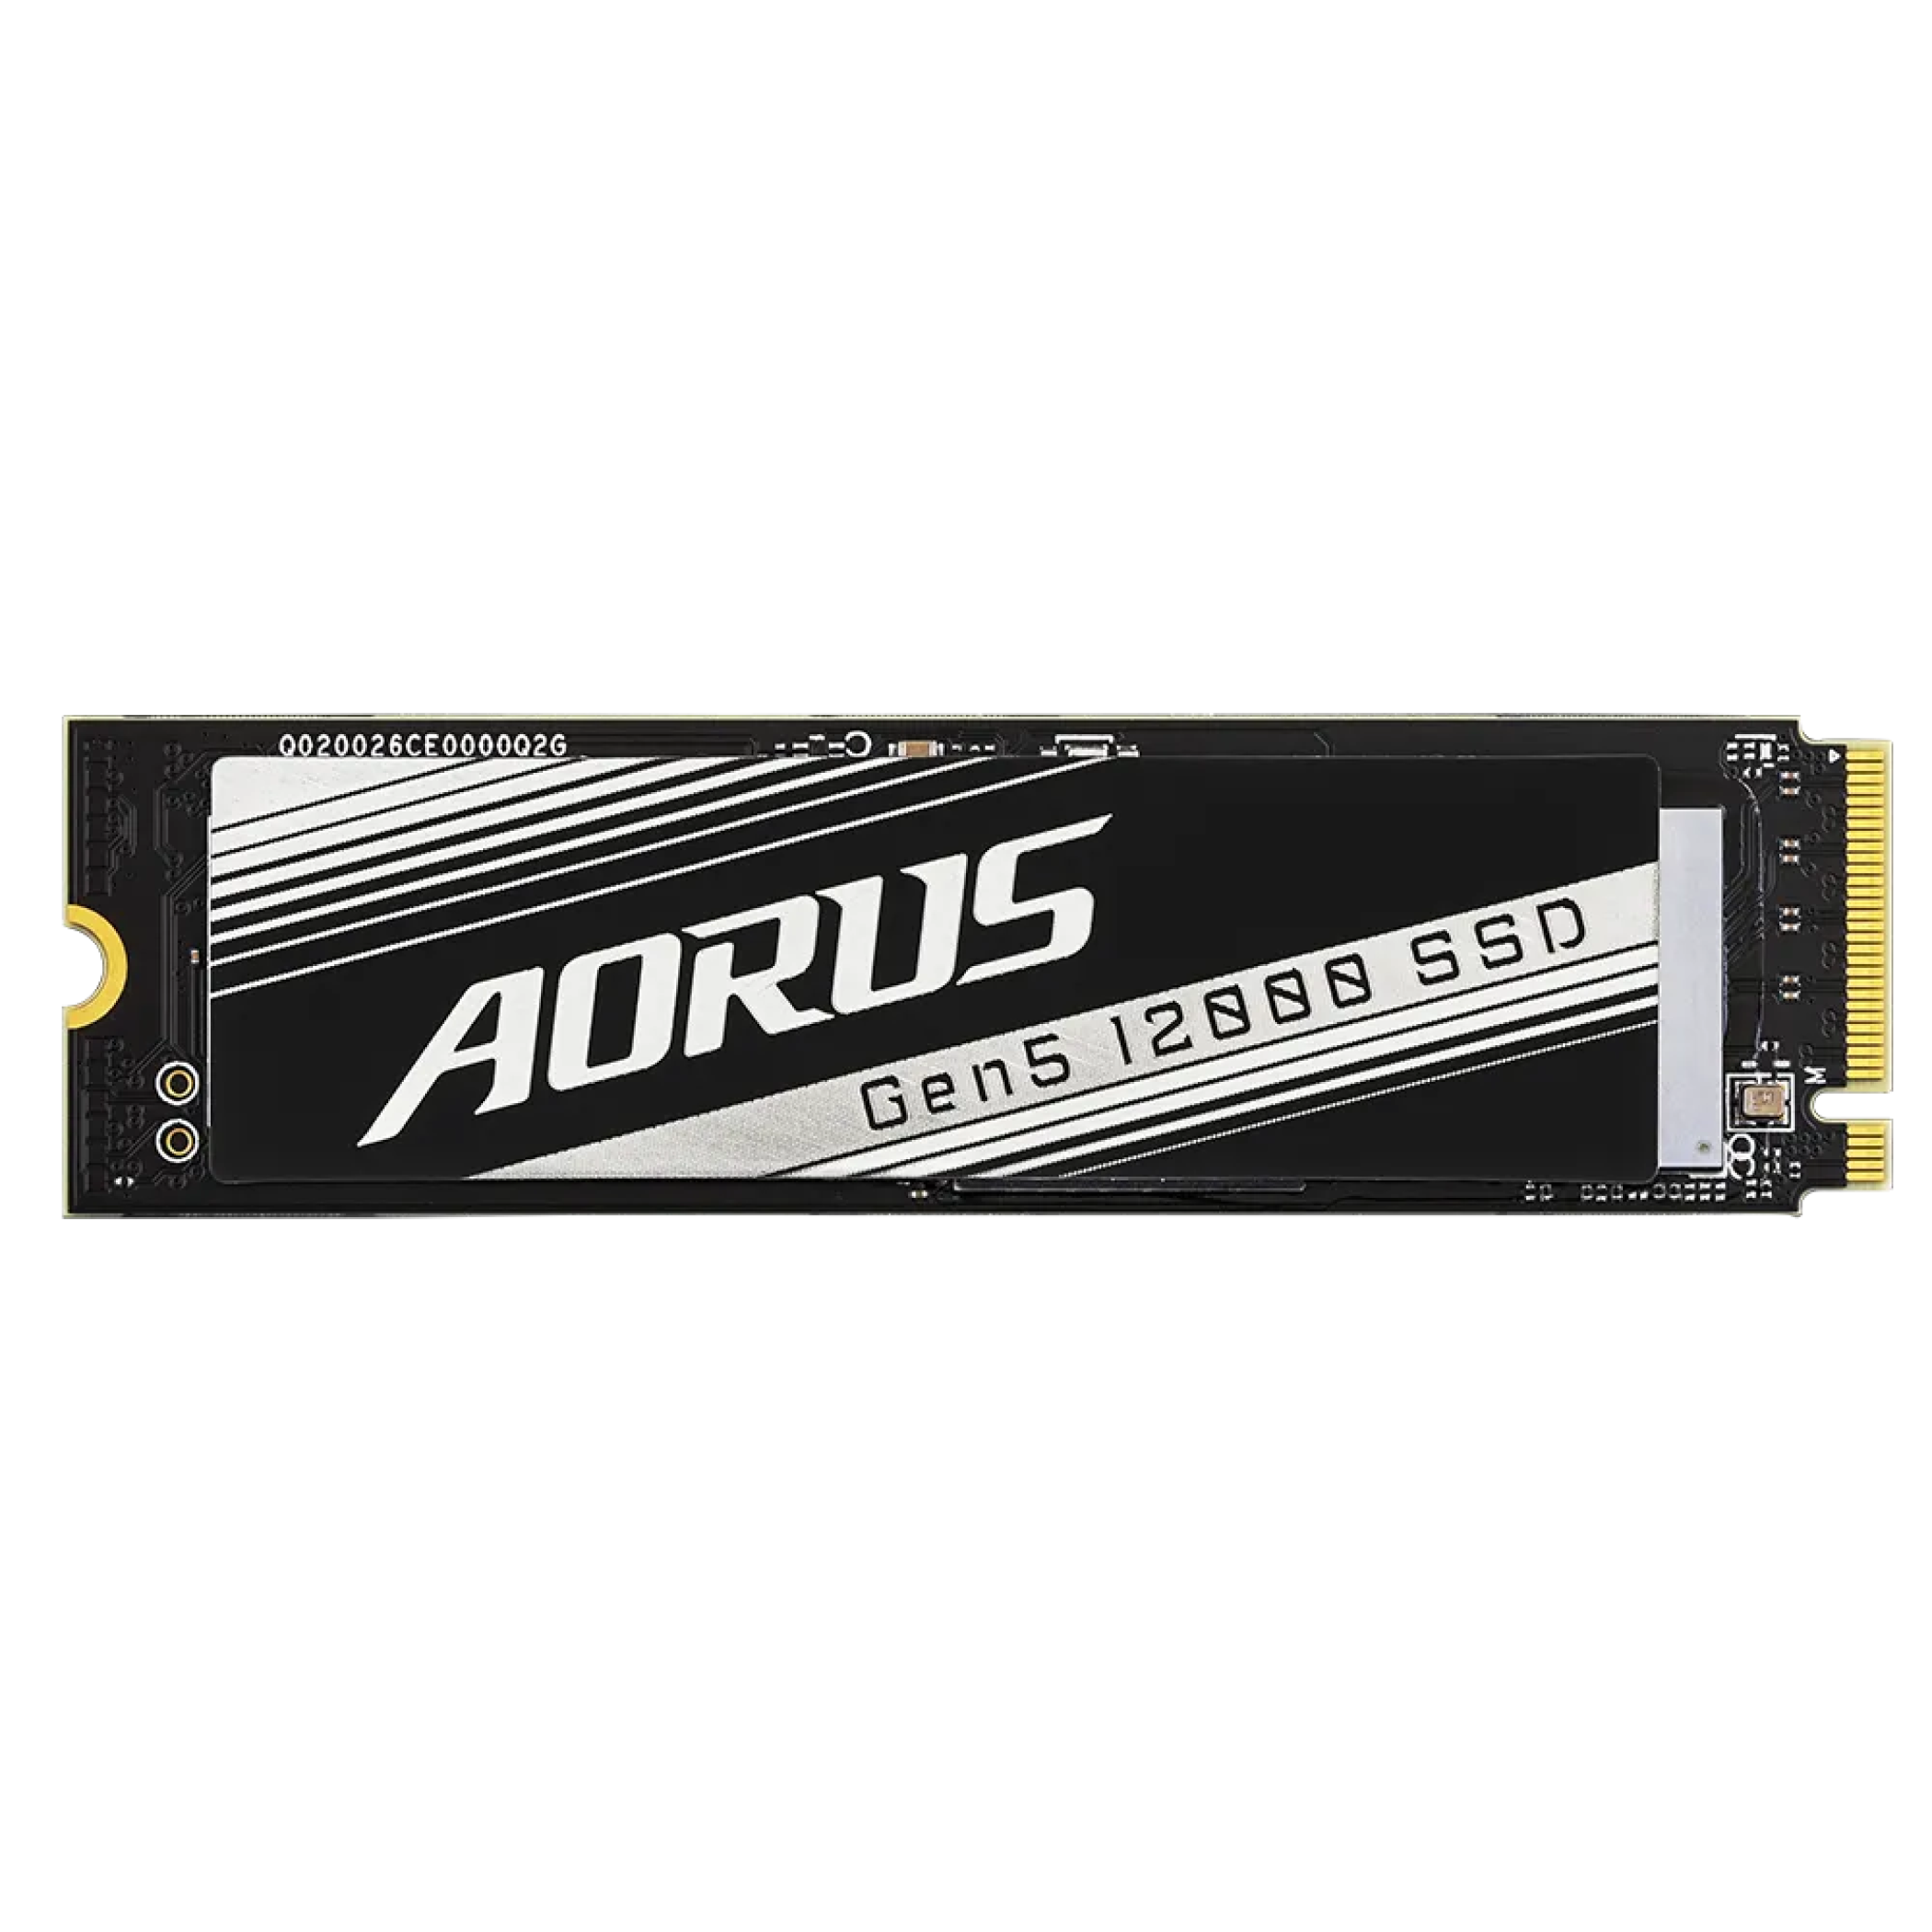 Gigabyte Aorus Gen5 10000 review: The first PCIe 5.0 SSD makes a